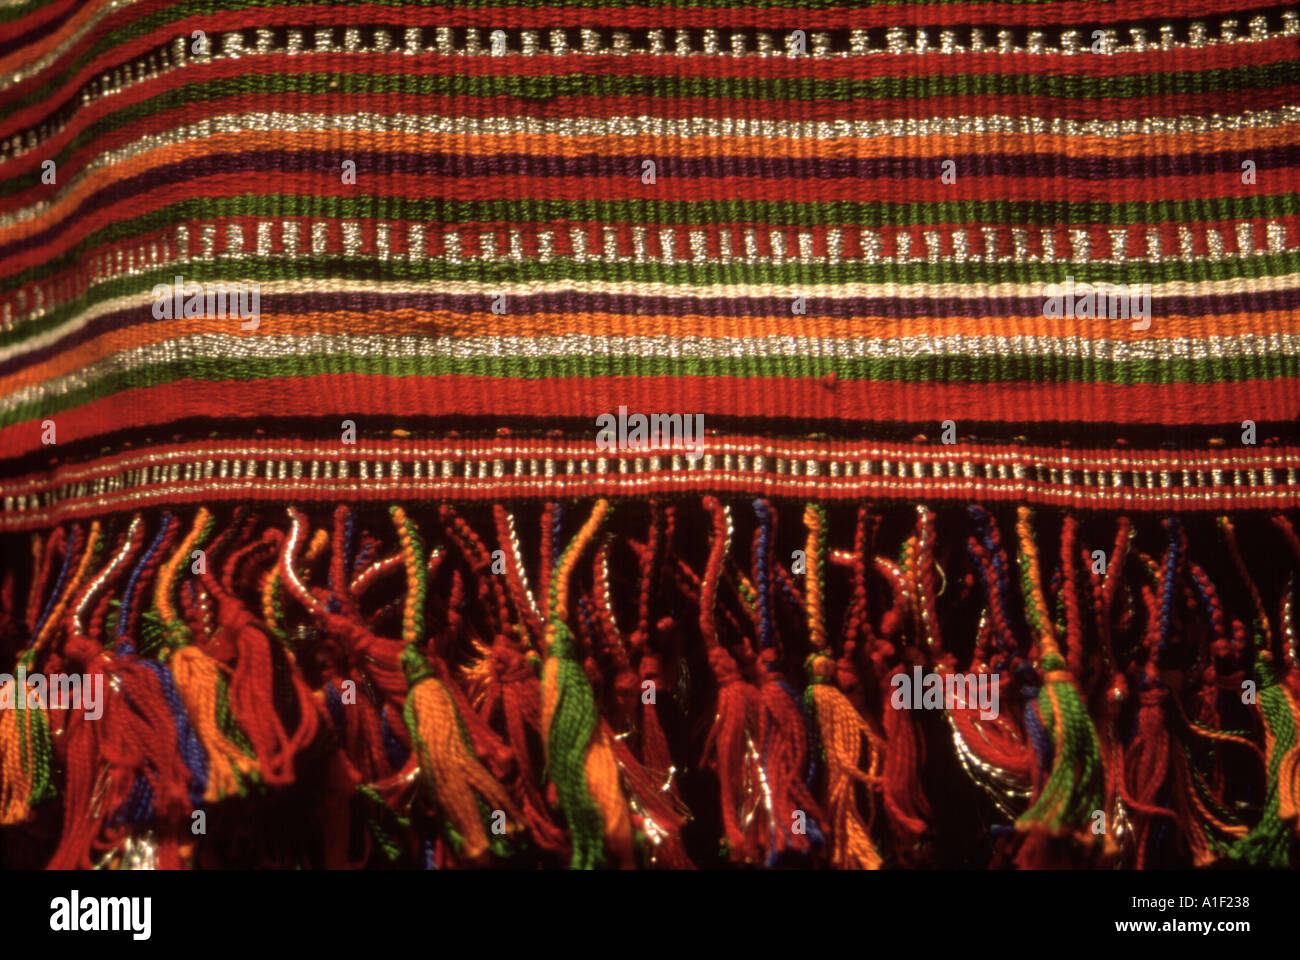 Traditionally woven Bedouin mat in Oman Stock Photo